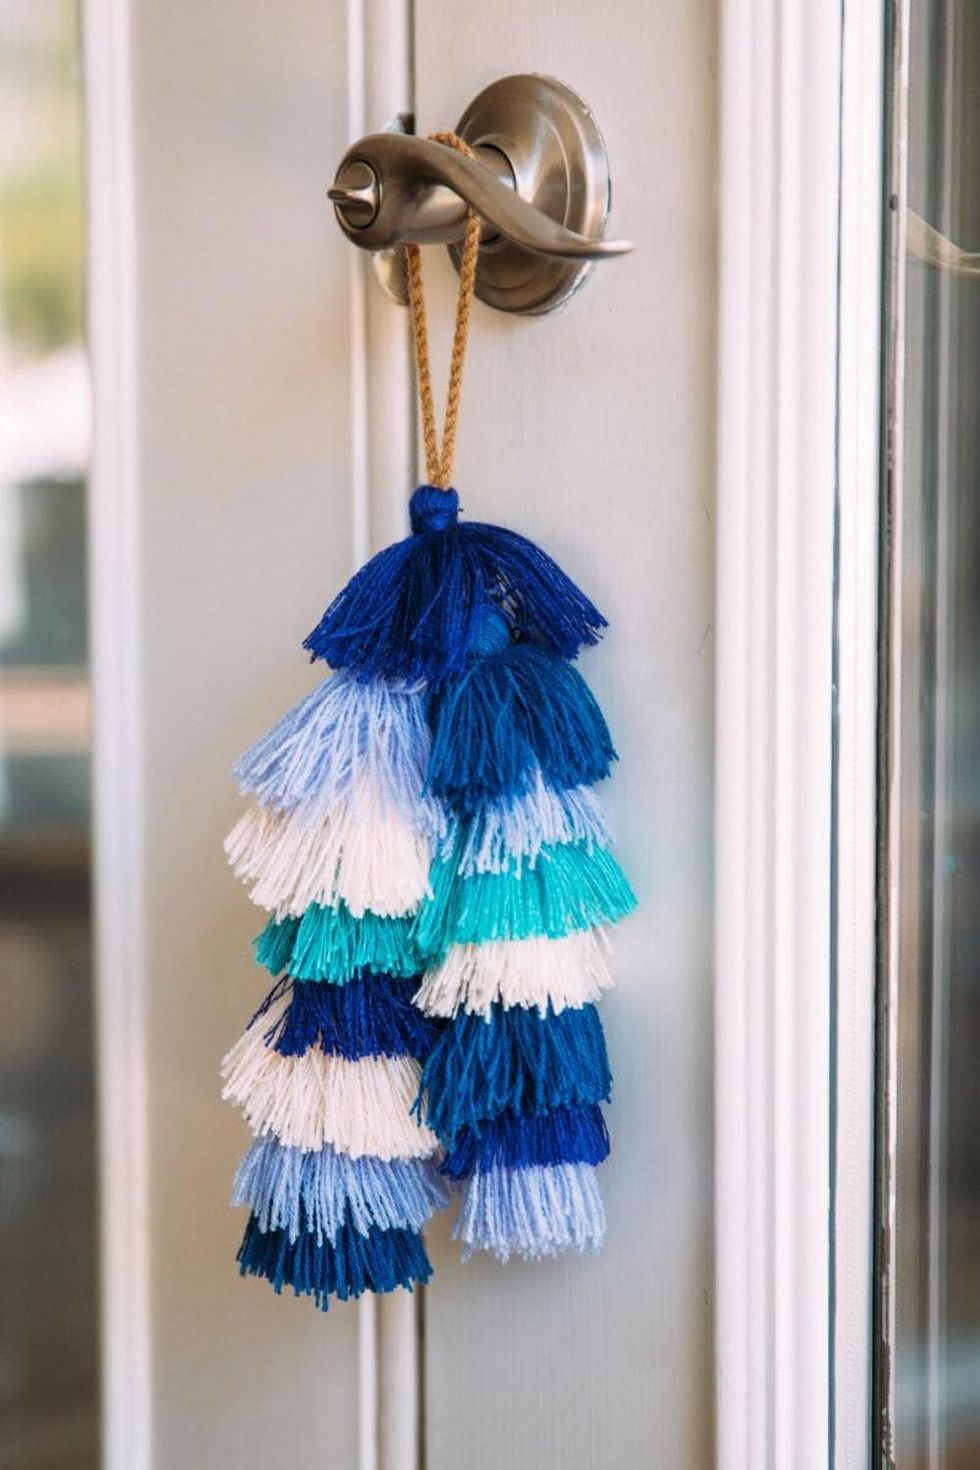 The Statement-Making Door Decor You Can DIY in 5 Minutes - Brit + Co